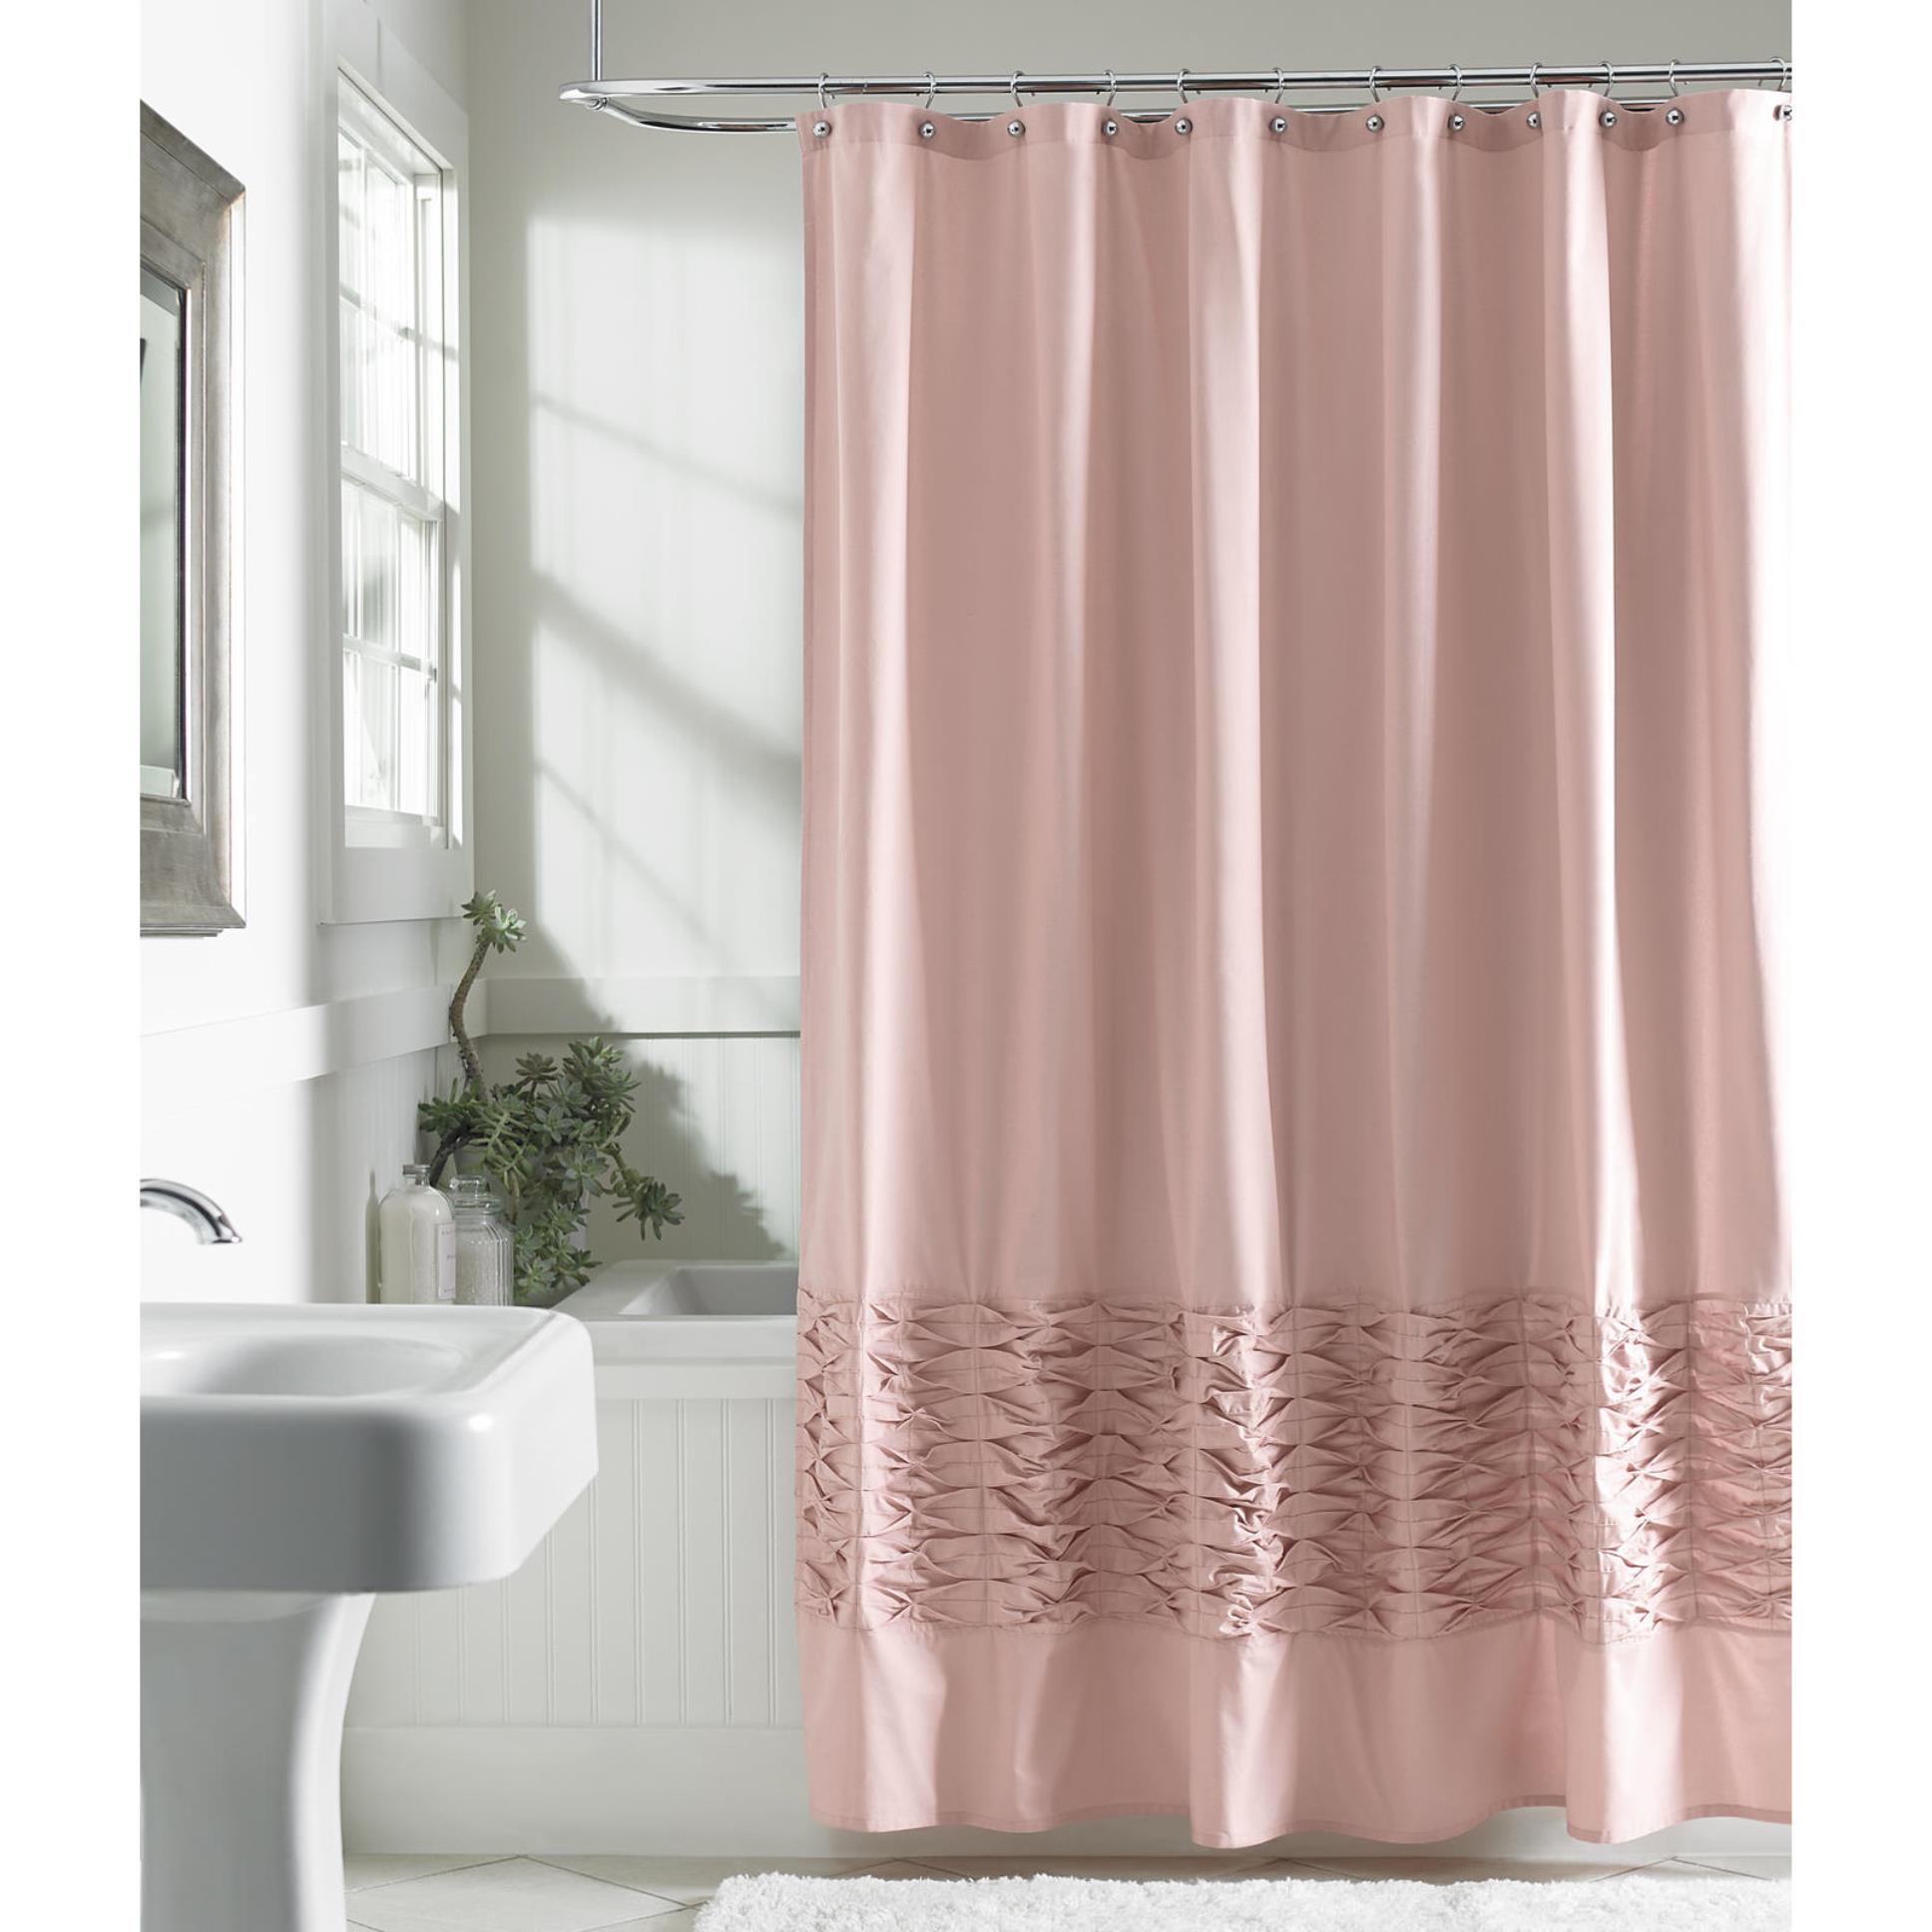 fabric shower curtains kohl's